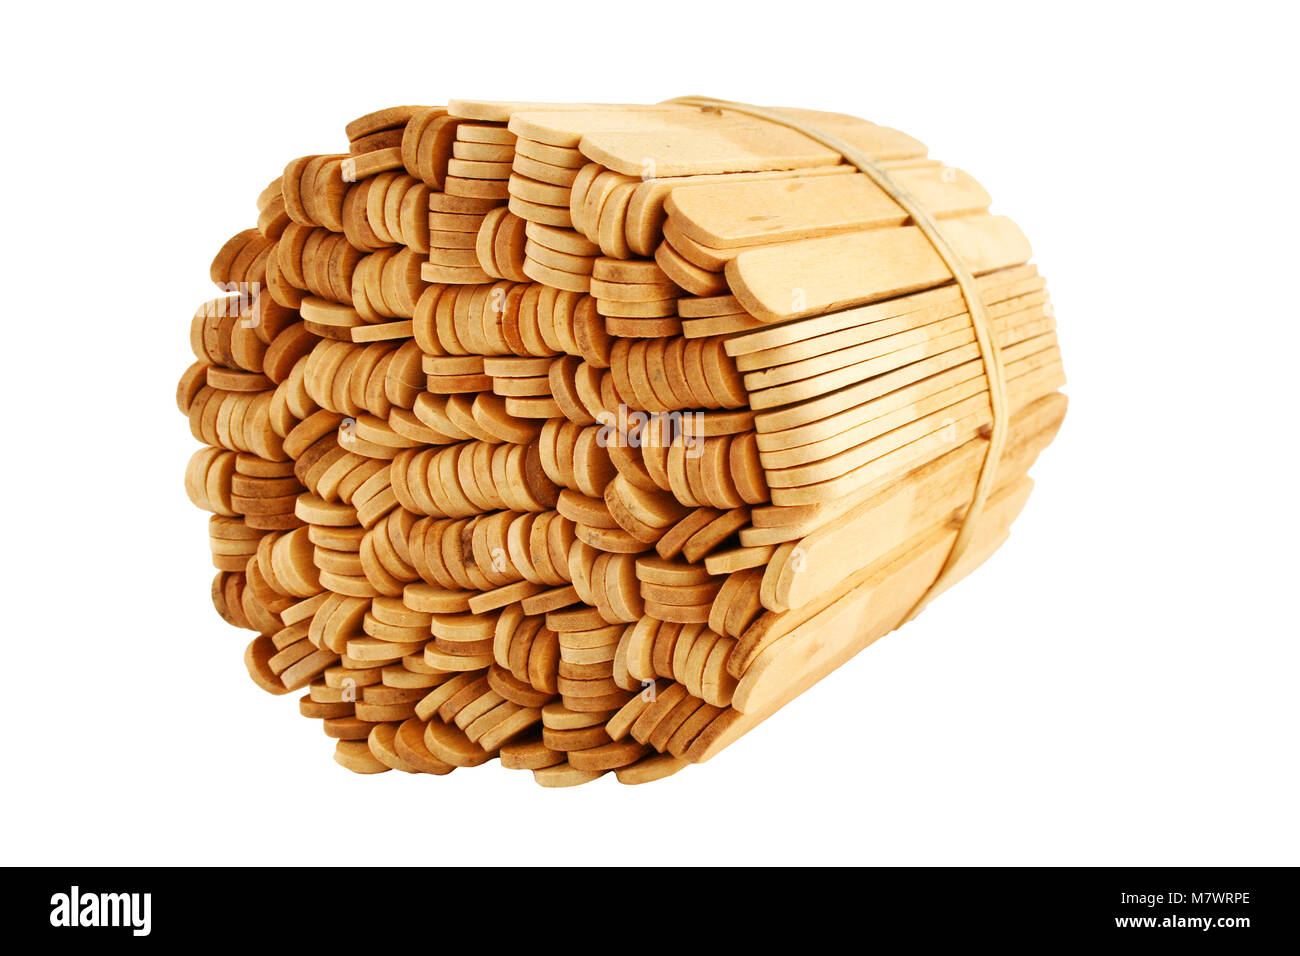 Wooden popsicle sticks Cut Out Stock Images & Pictures - Page 2 - Alamy